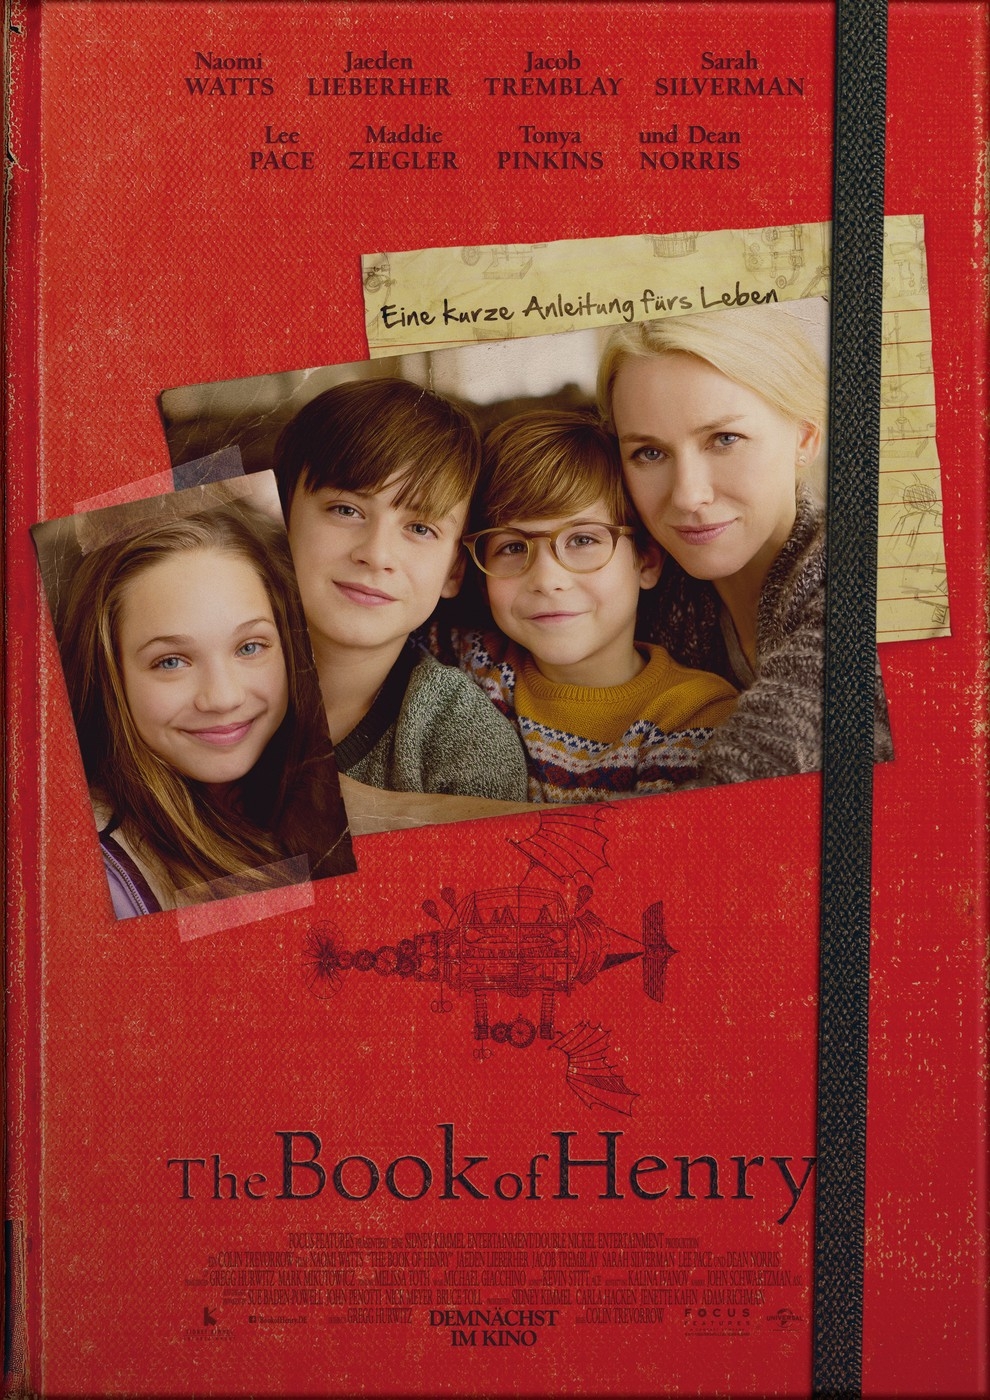 The Book of Henry (Poster)